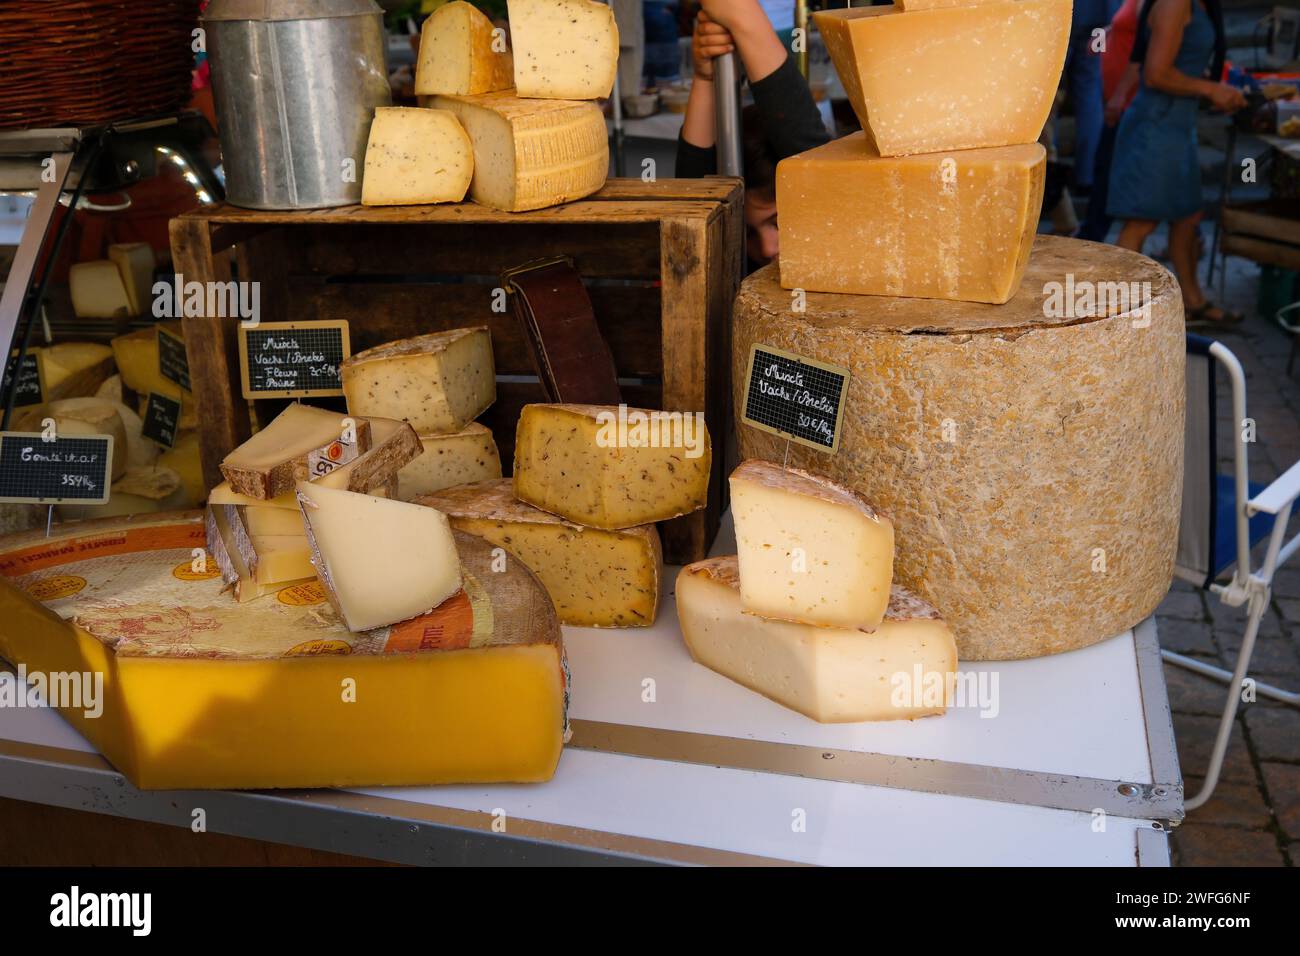 Stall at the Saturday market selling various local cheese in Sarlat France Stock Photo